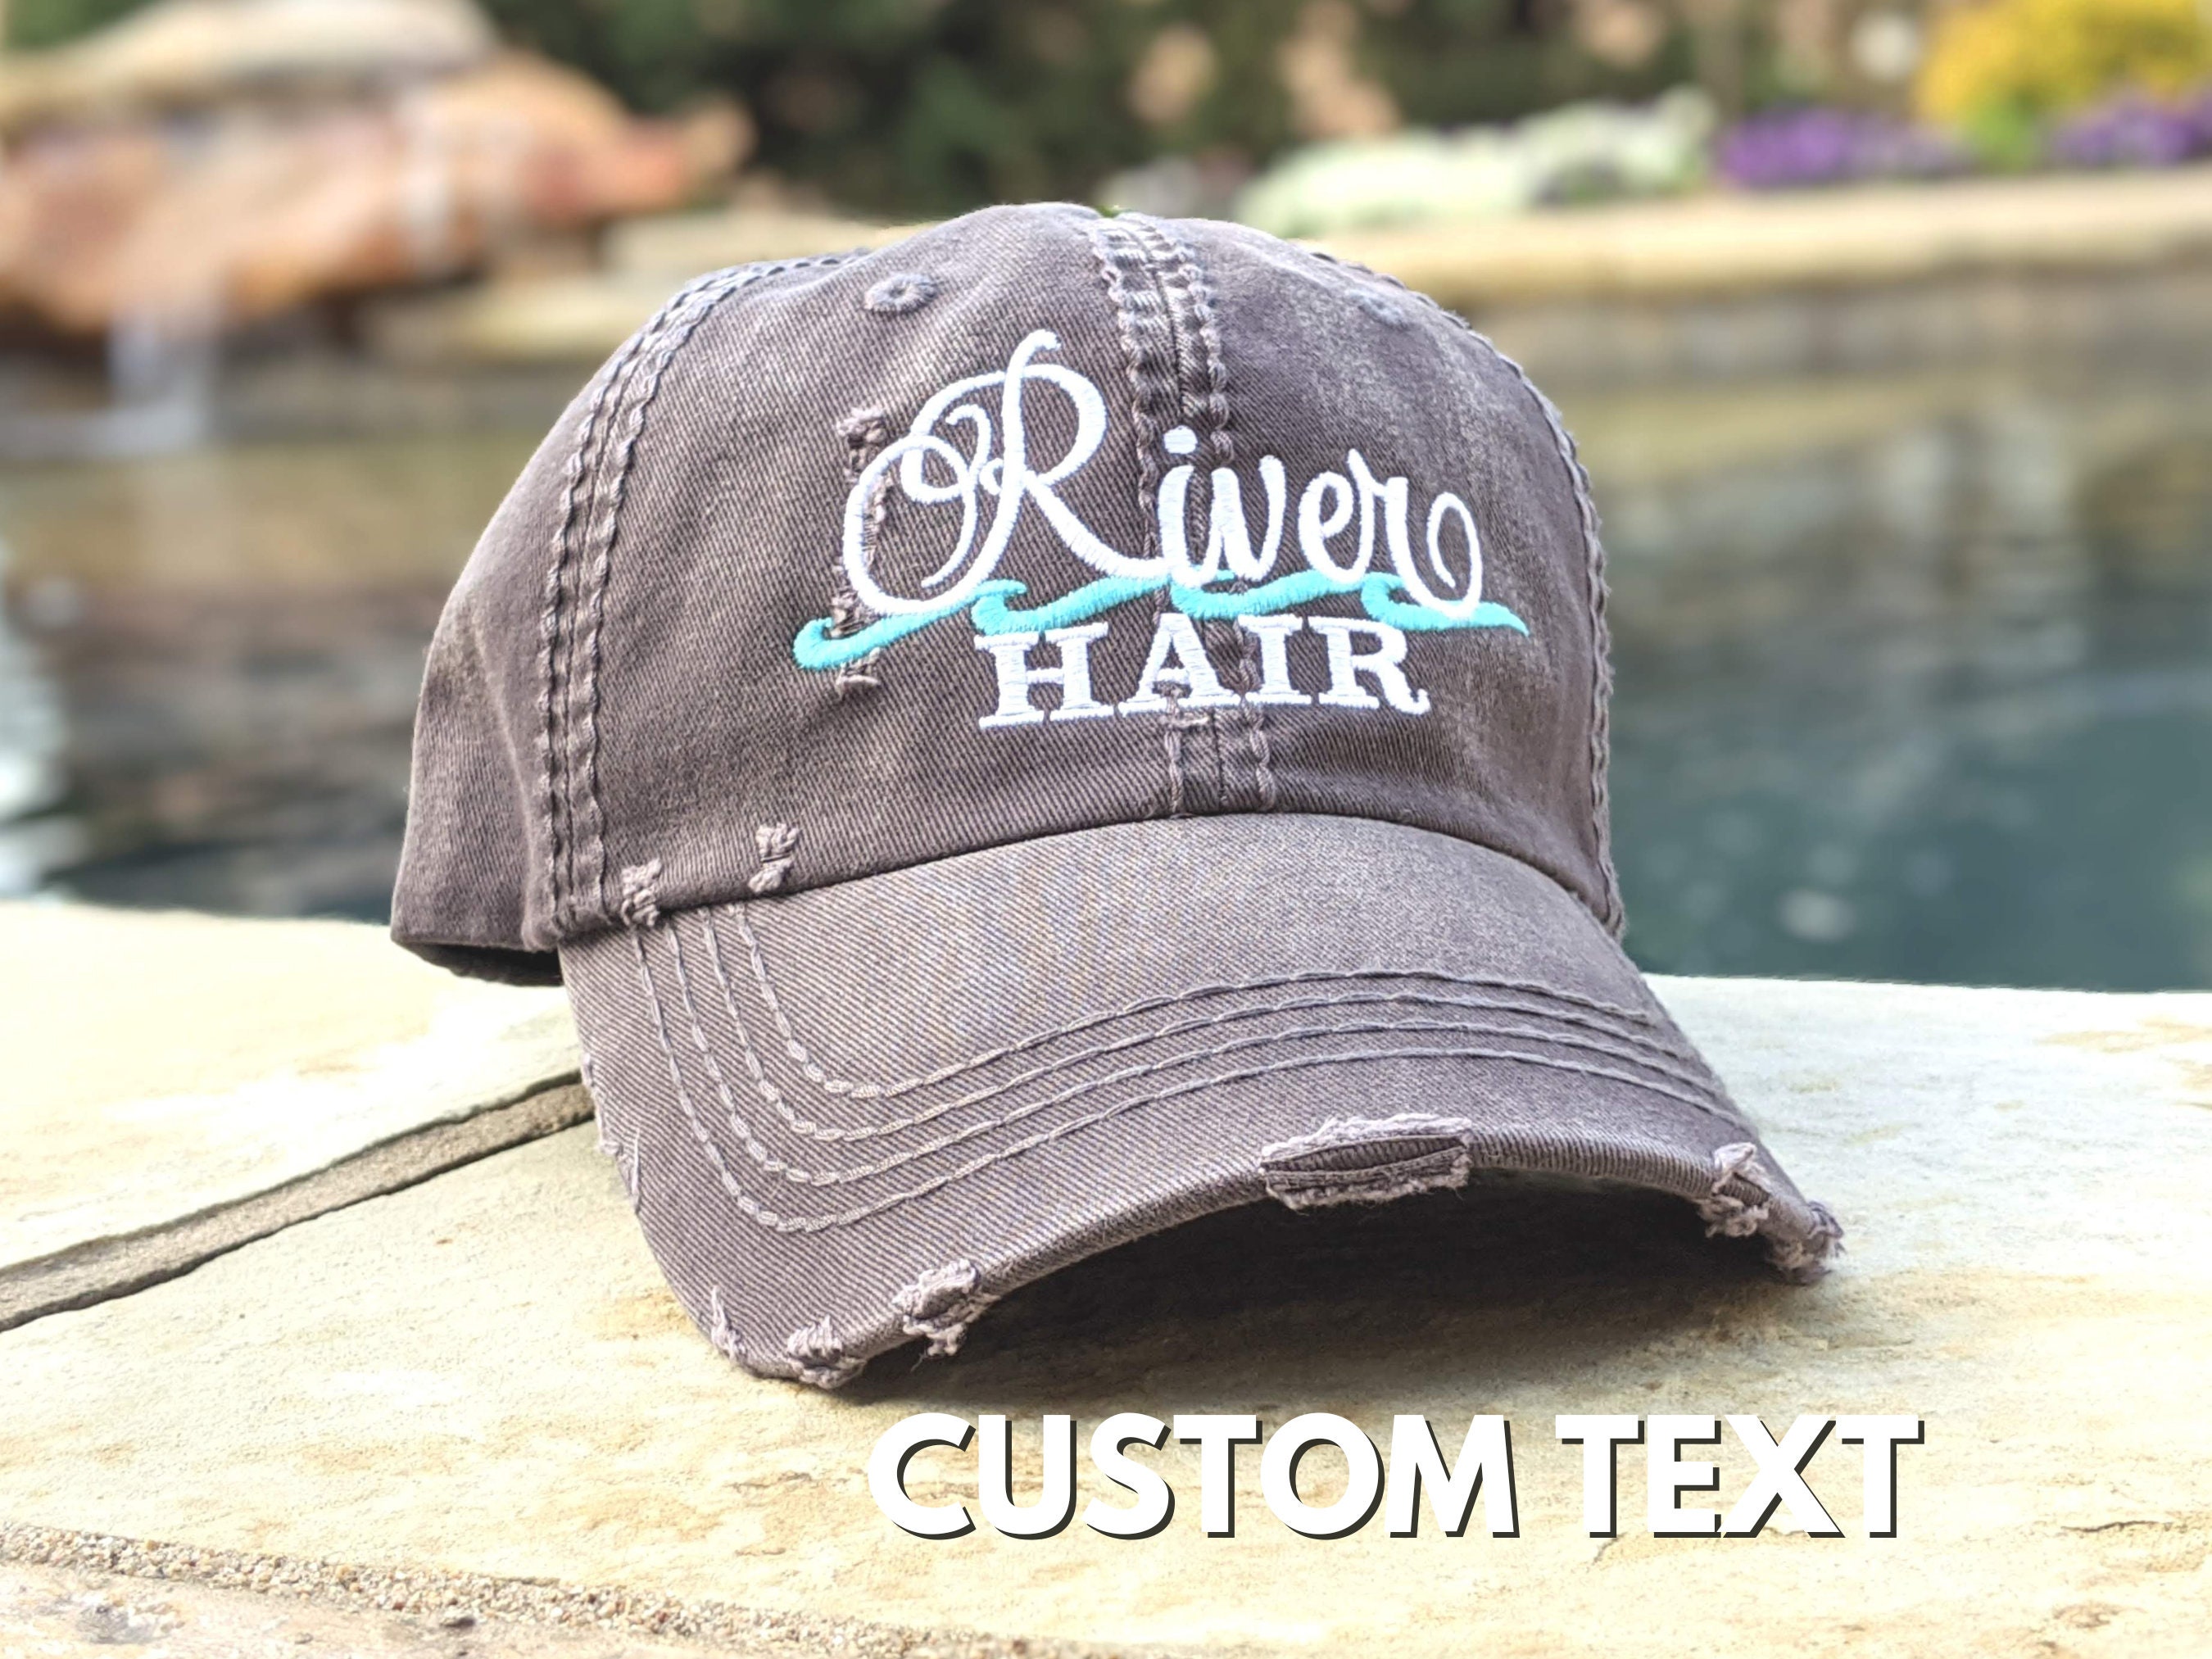 Women's Custom Text River Hat, Embroidered Sewn Baseball Cap, Cute Hair  Funny Pun, White Water Rafting Tubing Monogrammed Gift Present Mom -   Canada